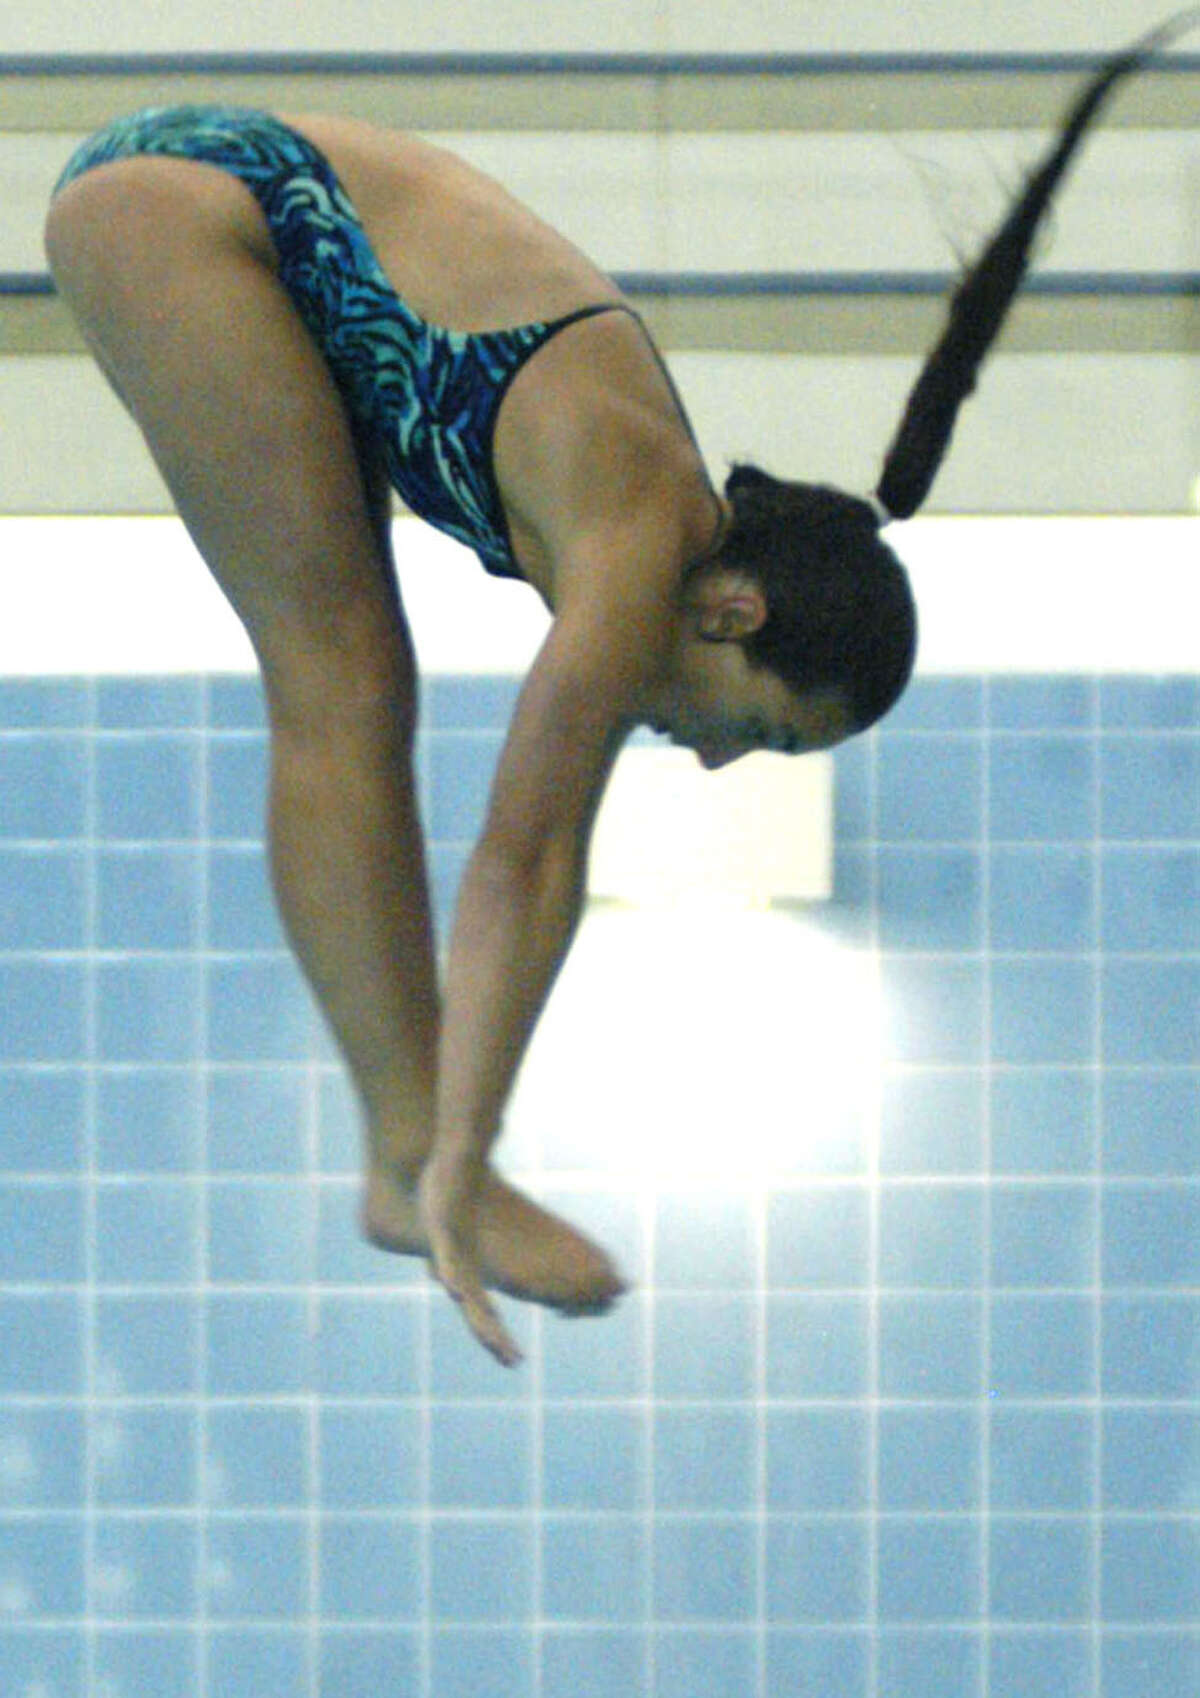 Yet another excellent dive is anything but a hair-raising experience for Green Wave senior Alison Profeta as she preps for the New Milford High School girls' swimming and diving season. September 2013 at Canterbury School